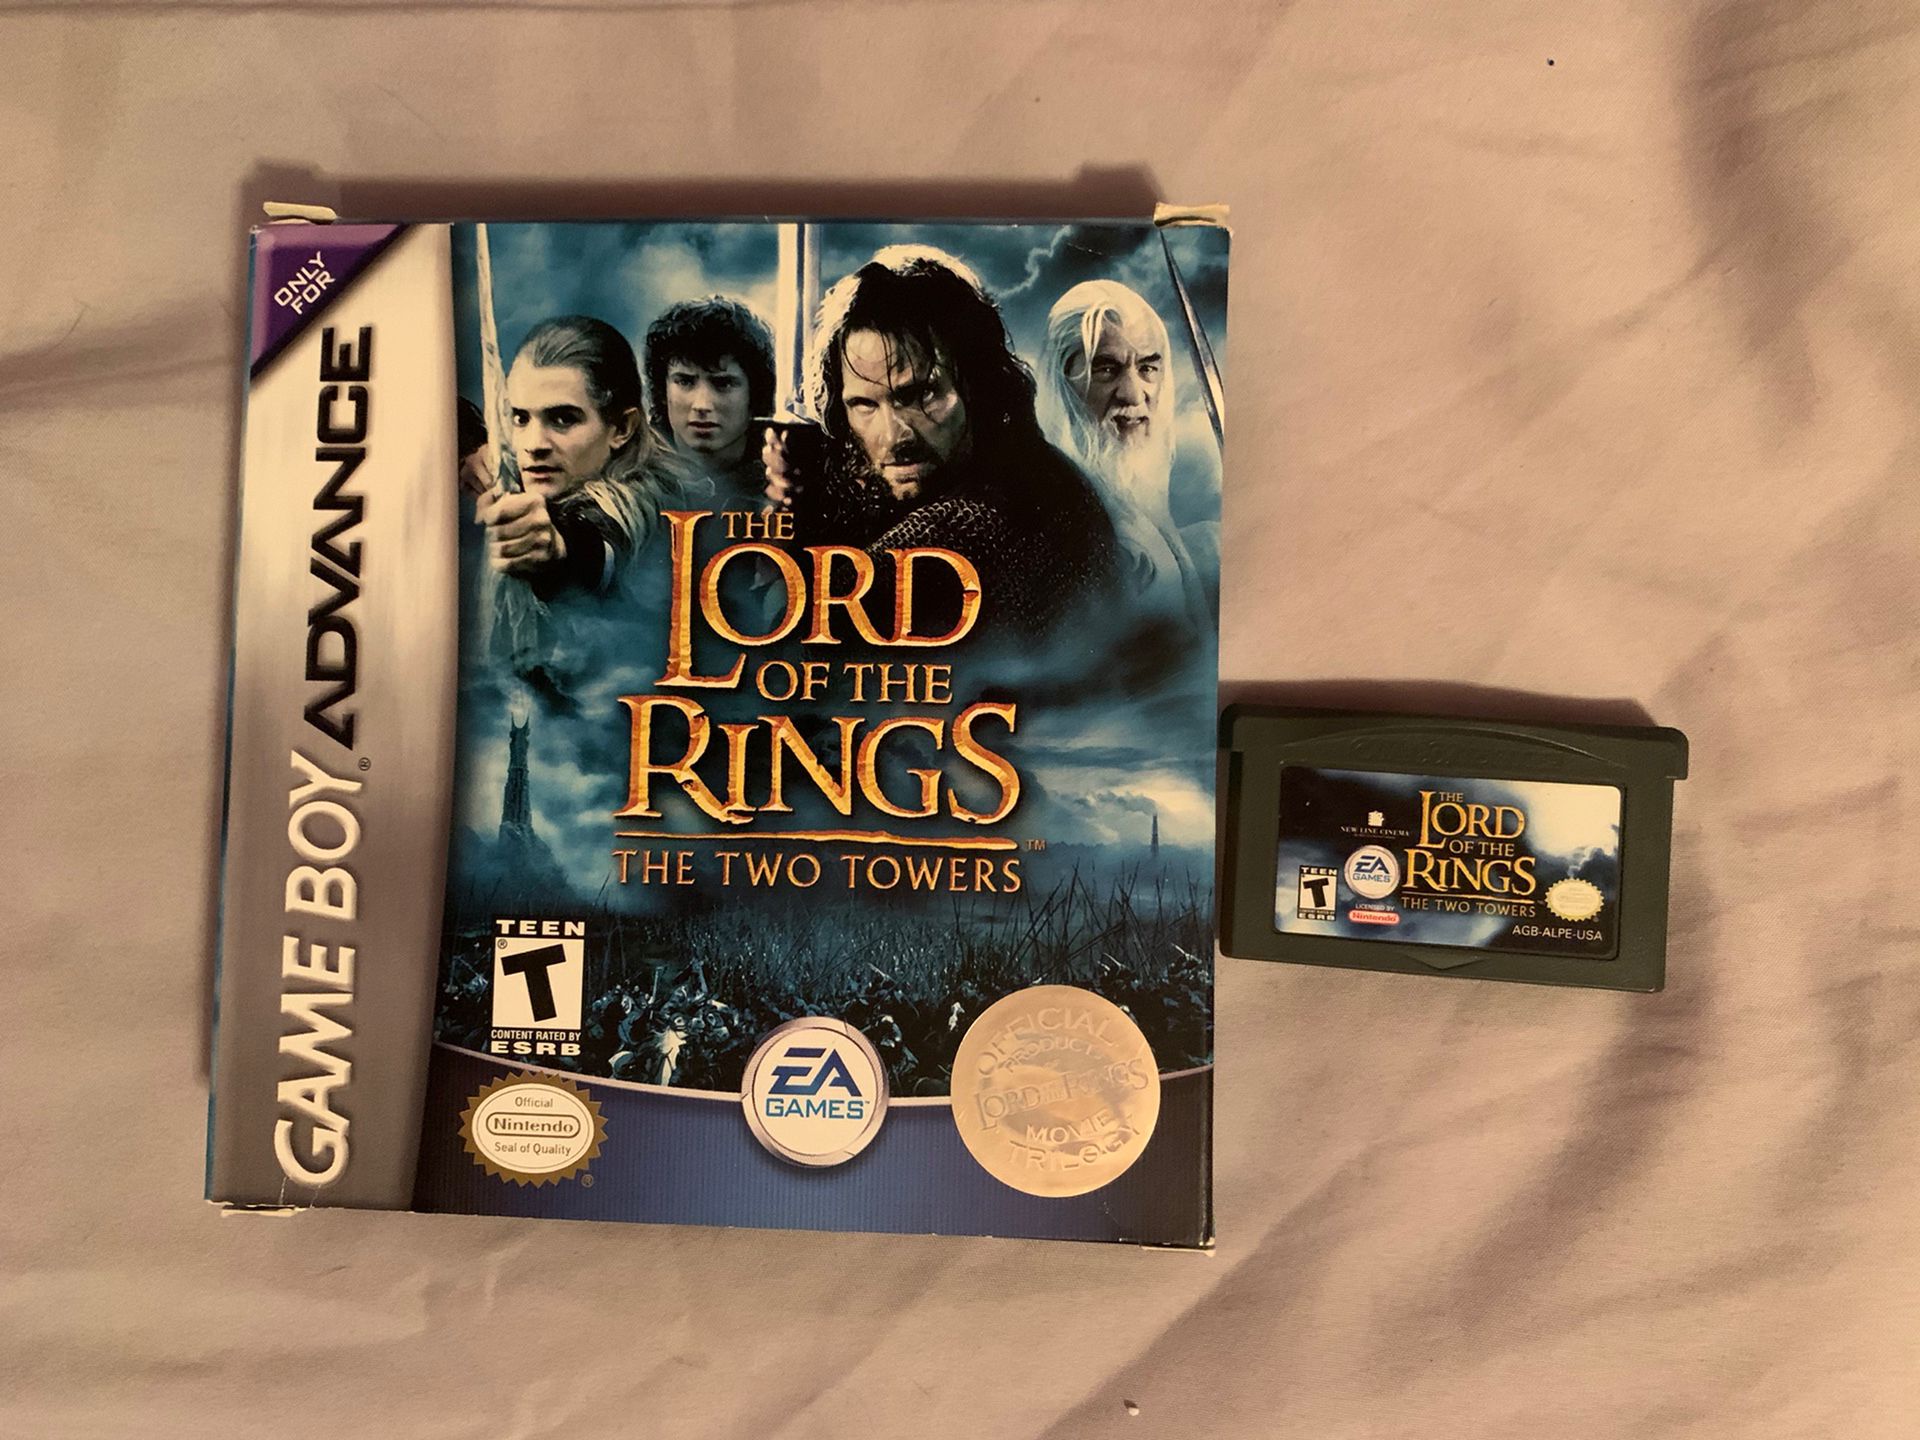 The Lord of the Rings The Two Towers Gameboy Advance 